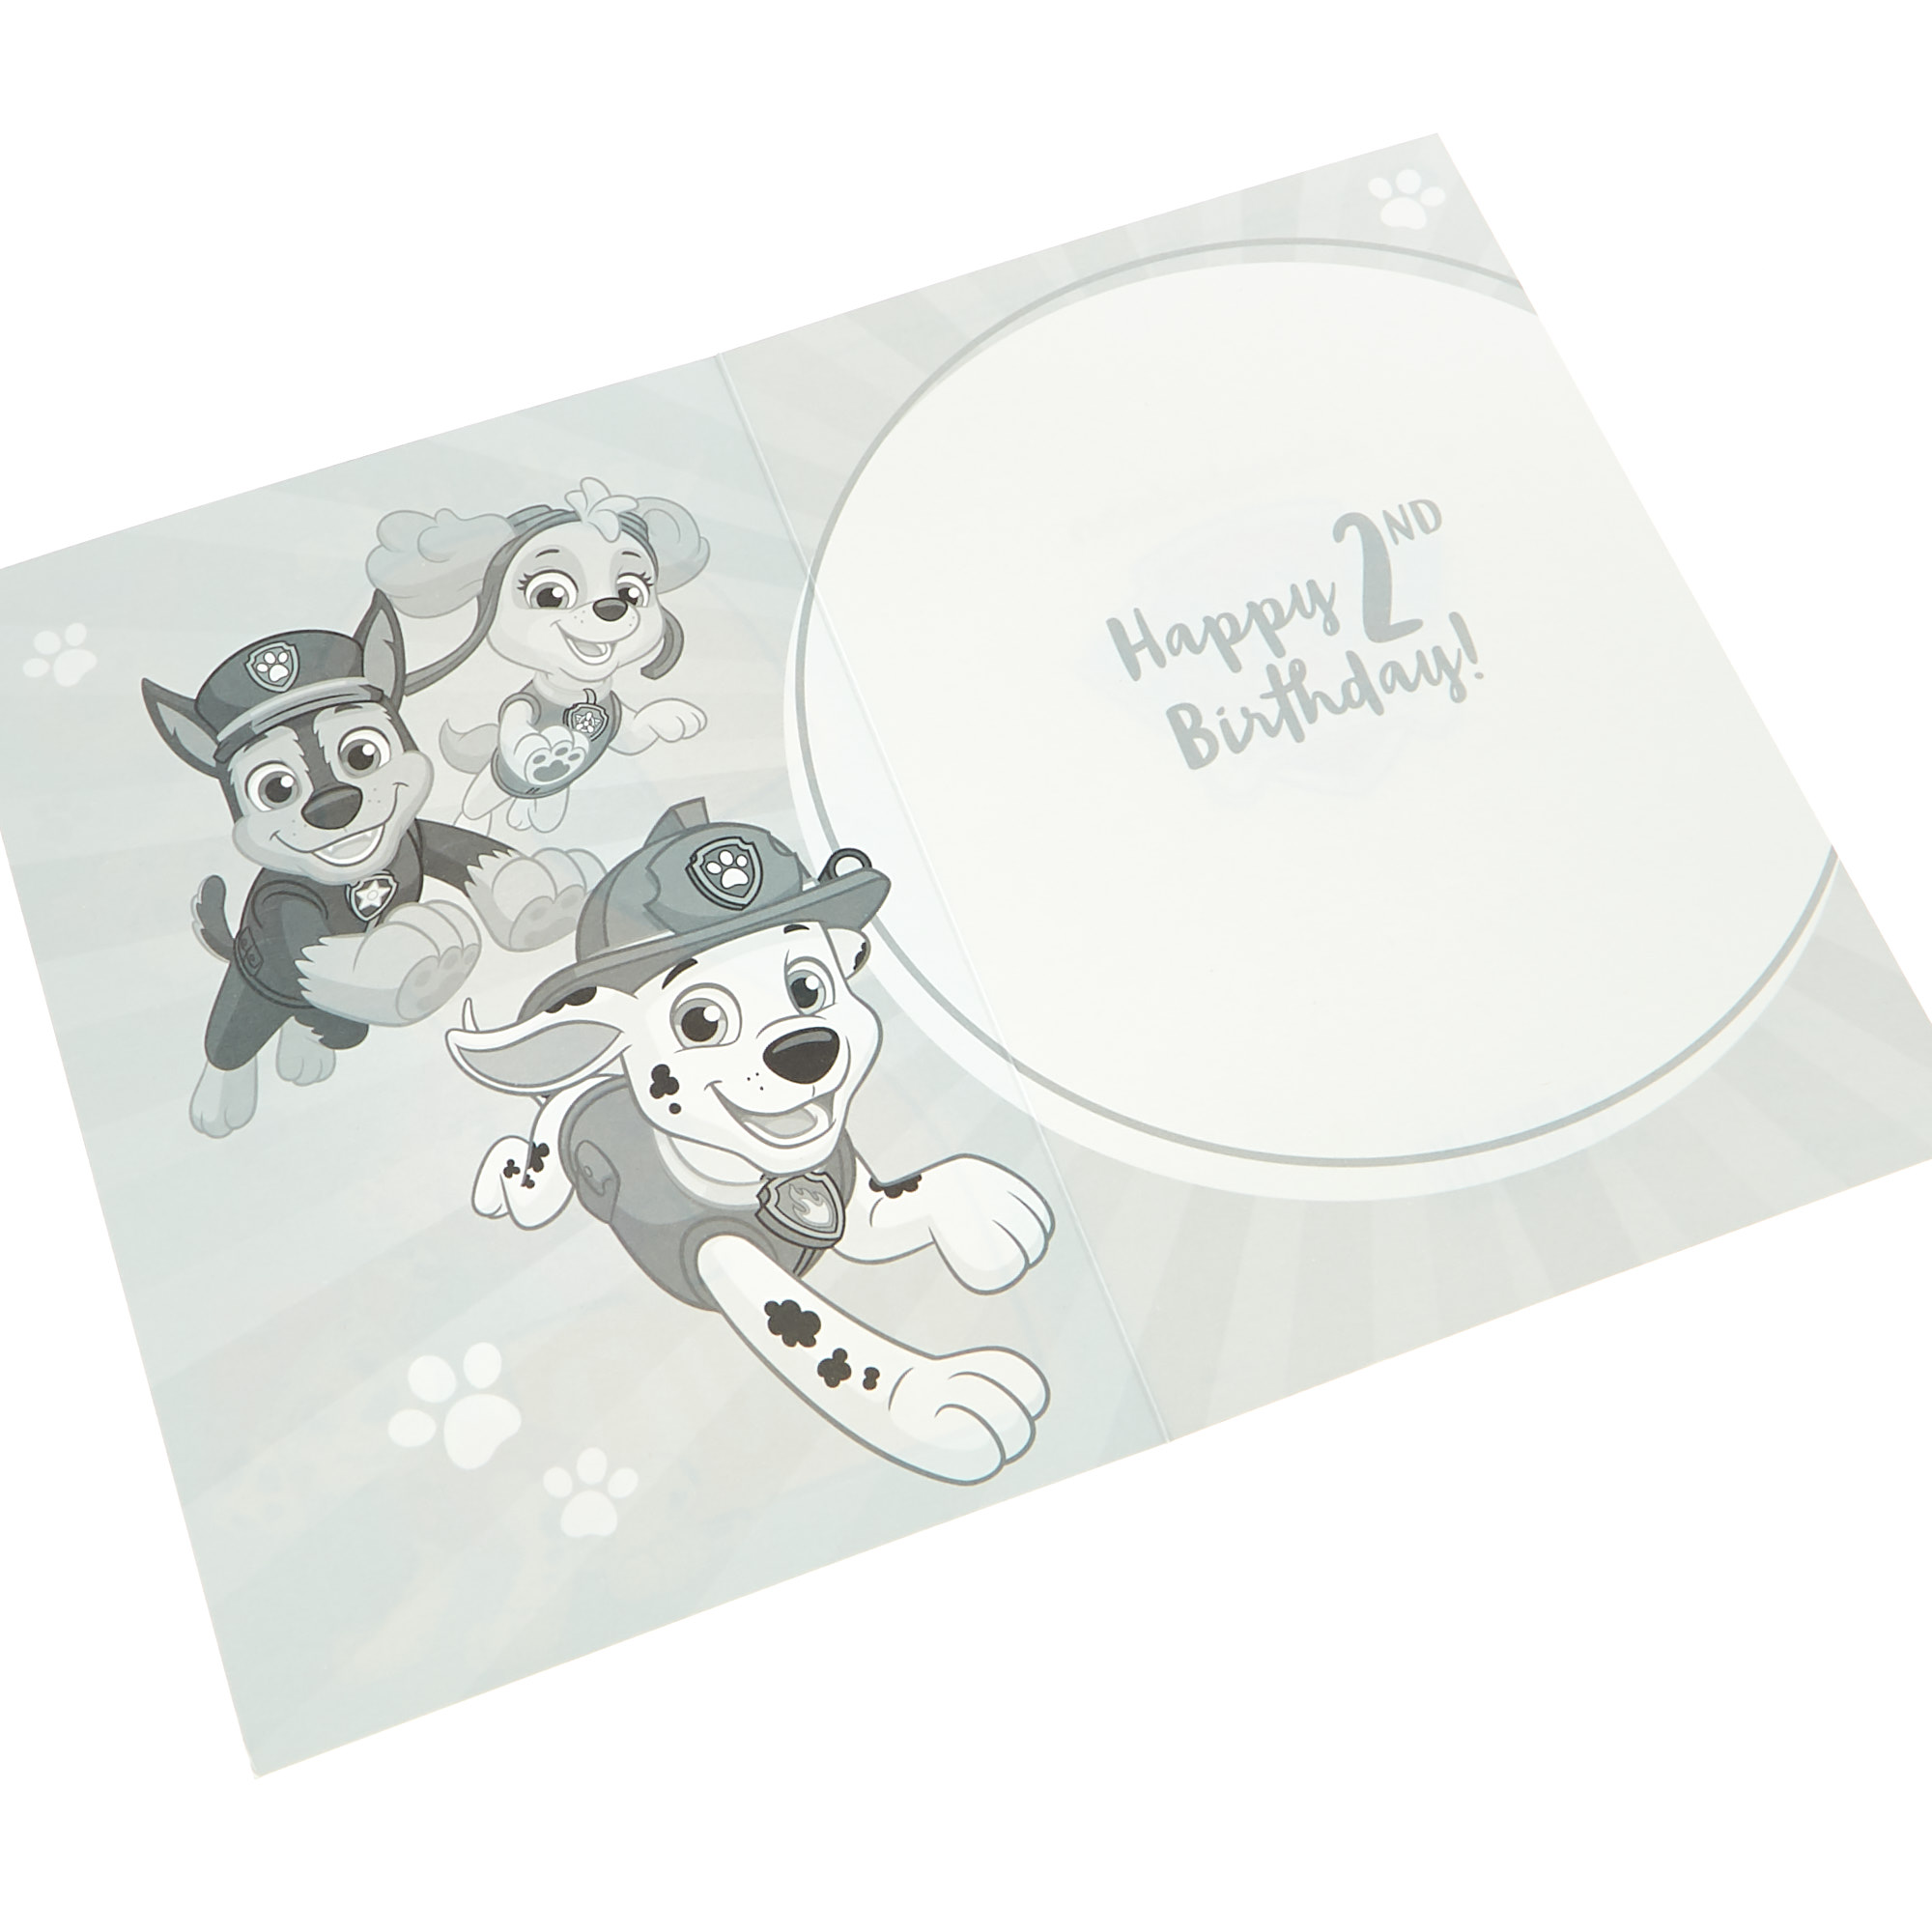 Personalised 60th Anniversary Card - Silver Heart